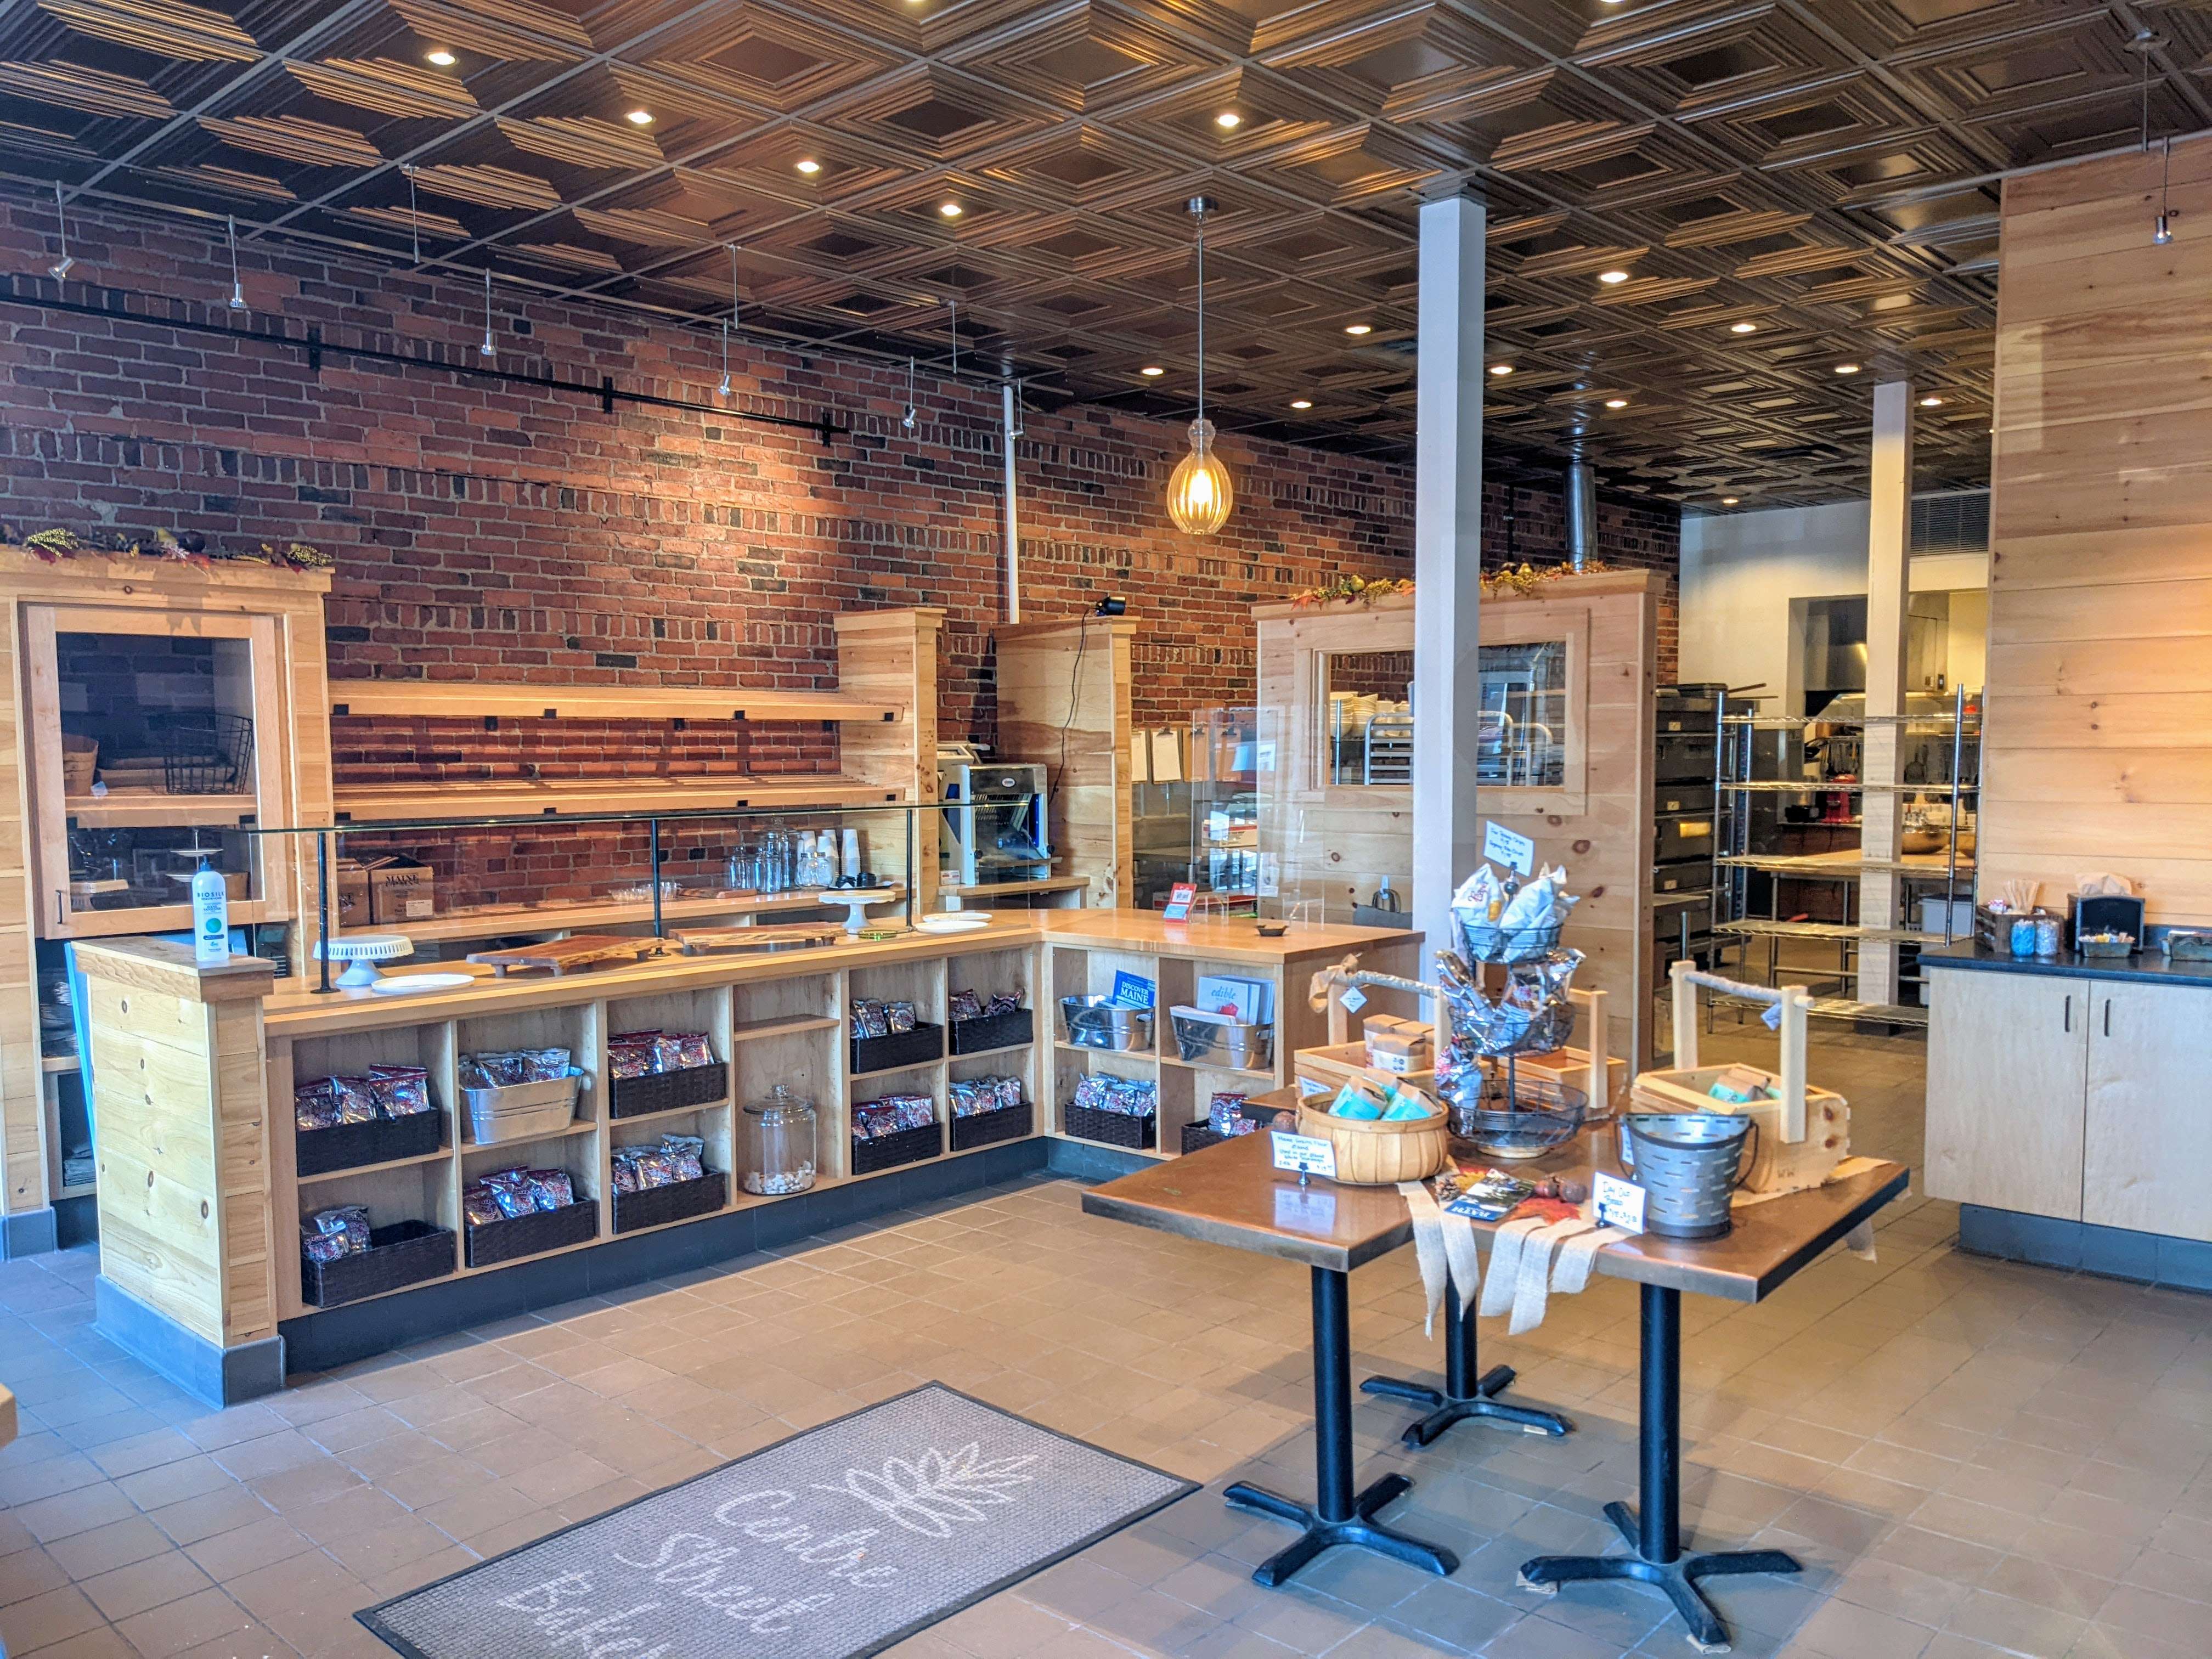 shop interior with brick walls and table